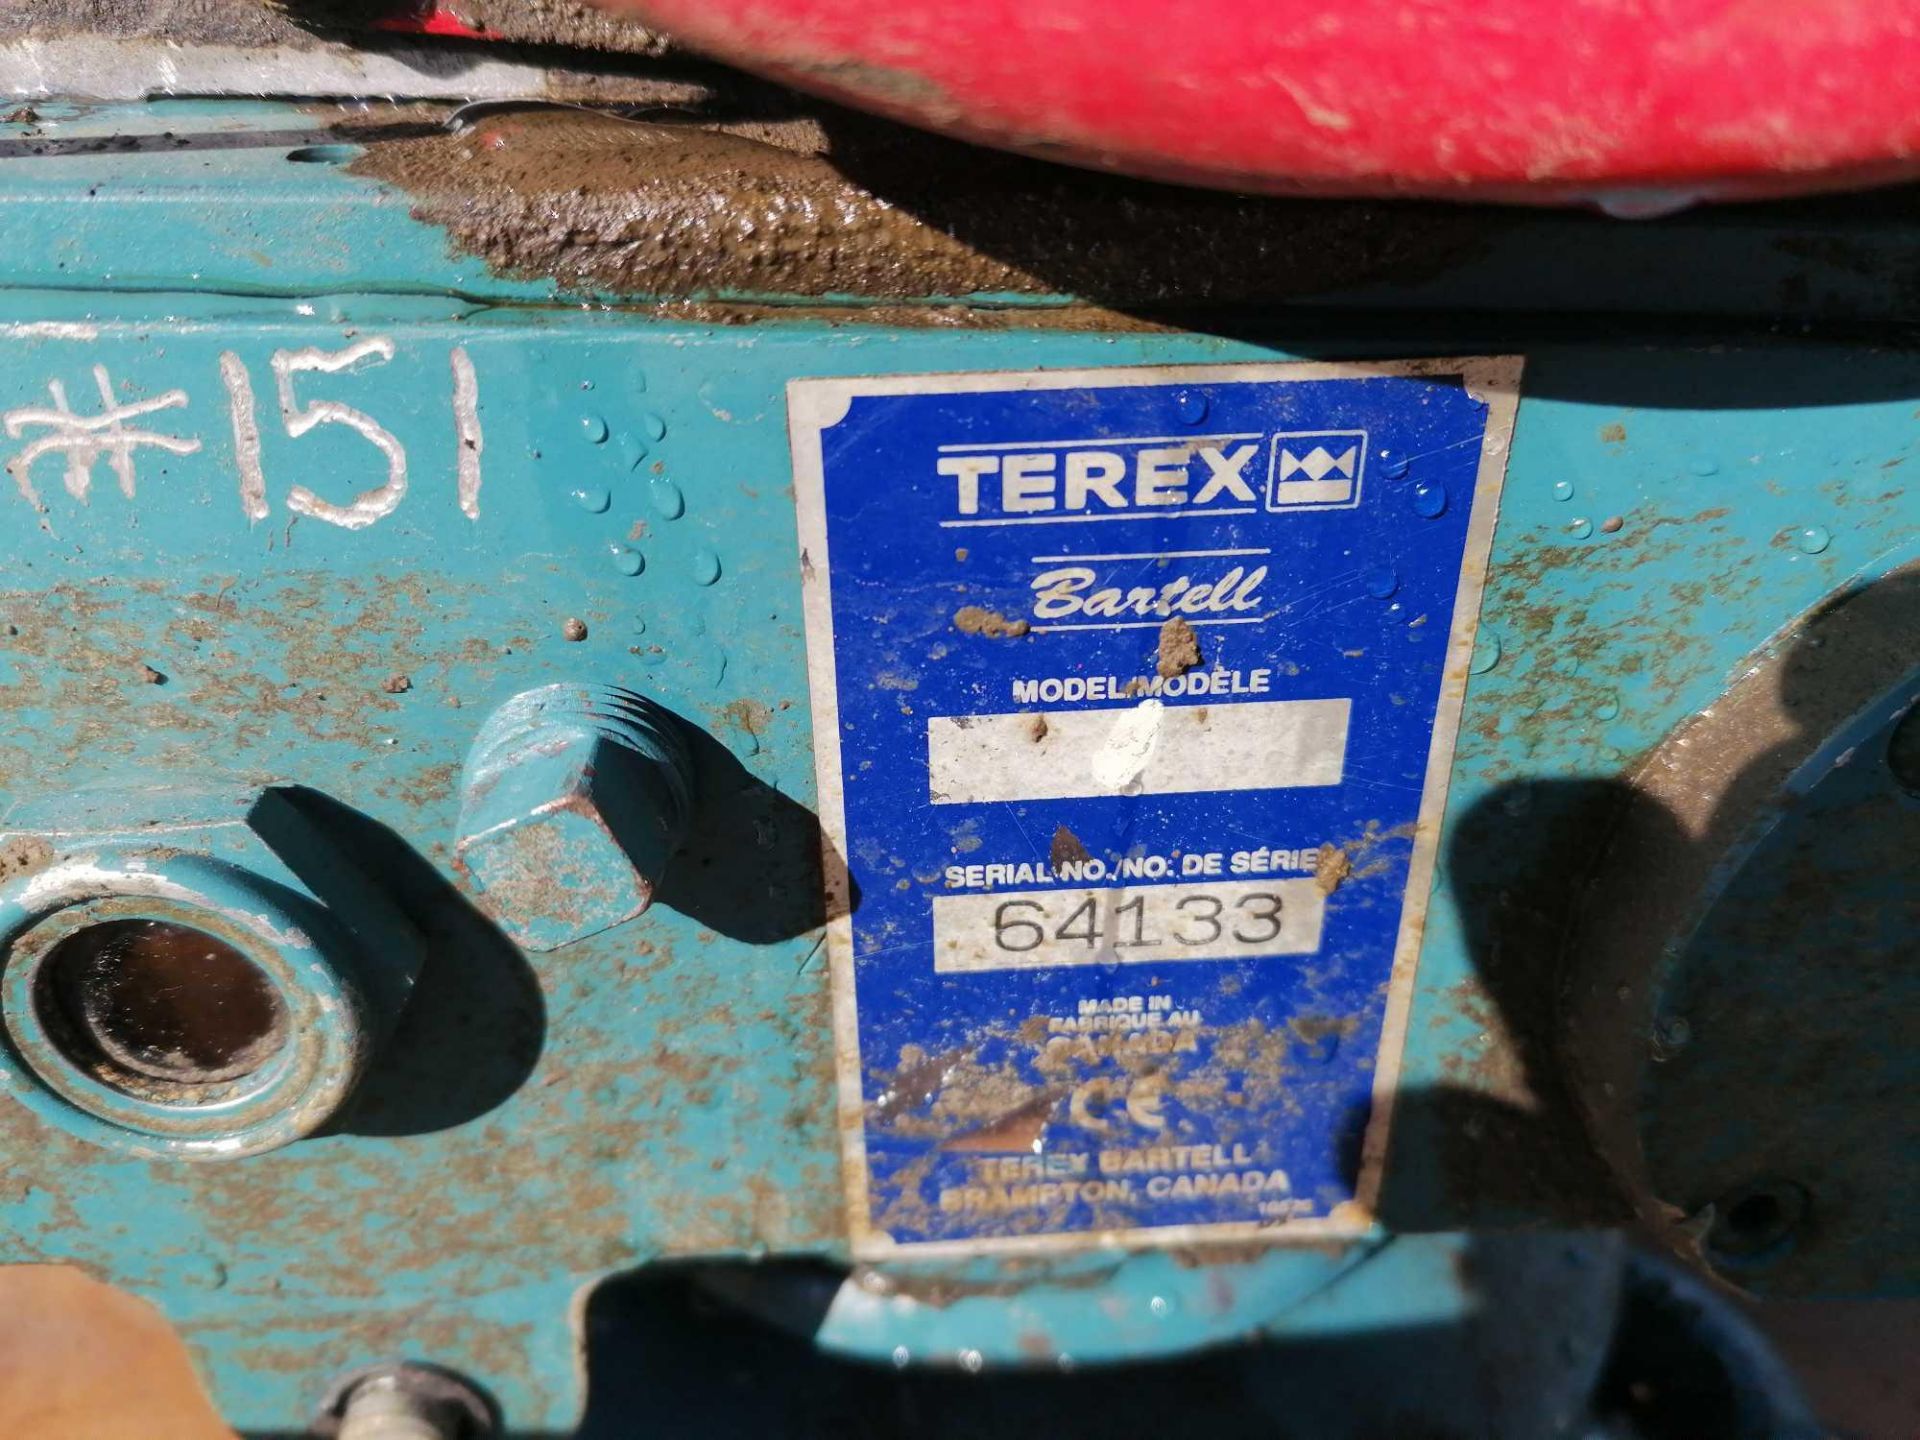 Terex Power Trowel, Serial #64133, Honda GX270 9.0 Engine. Located in Naperville, IL. - Image 3 of 6